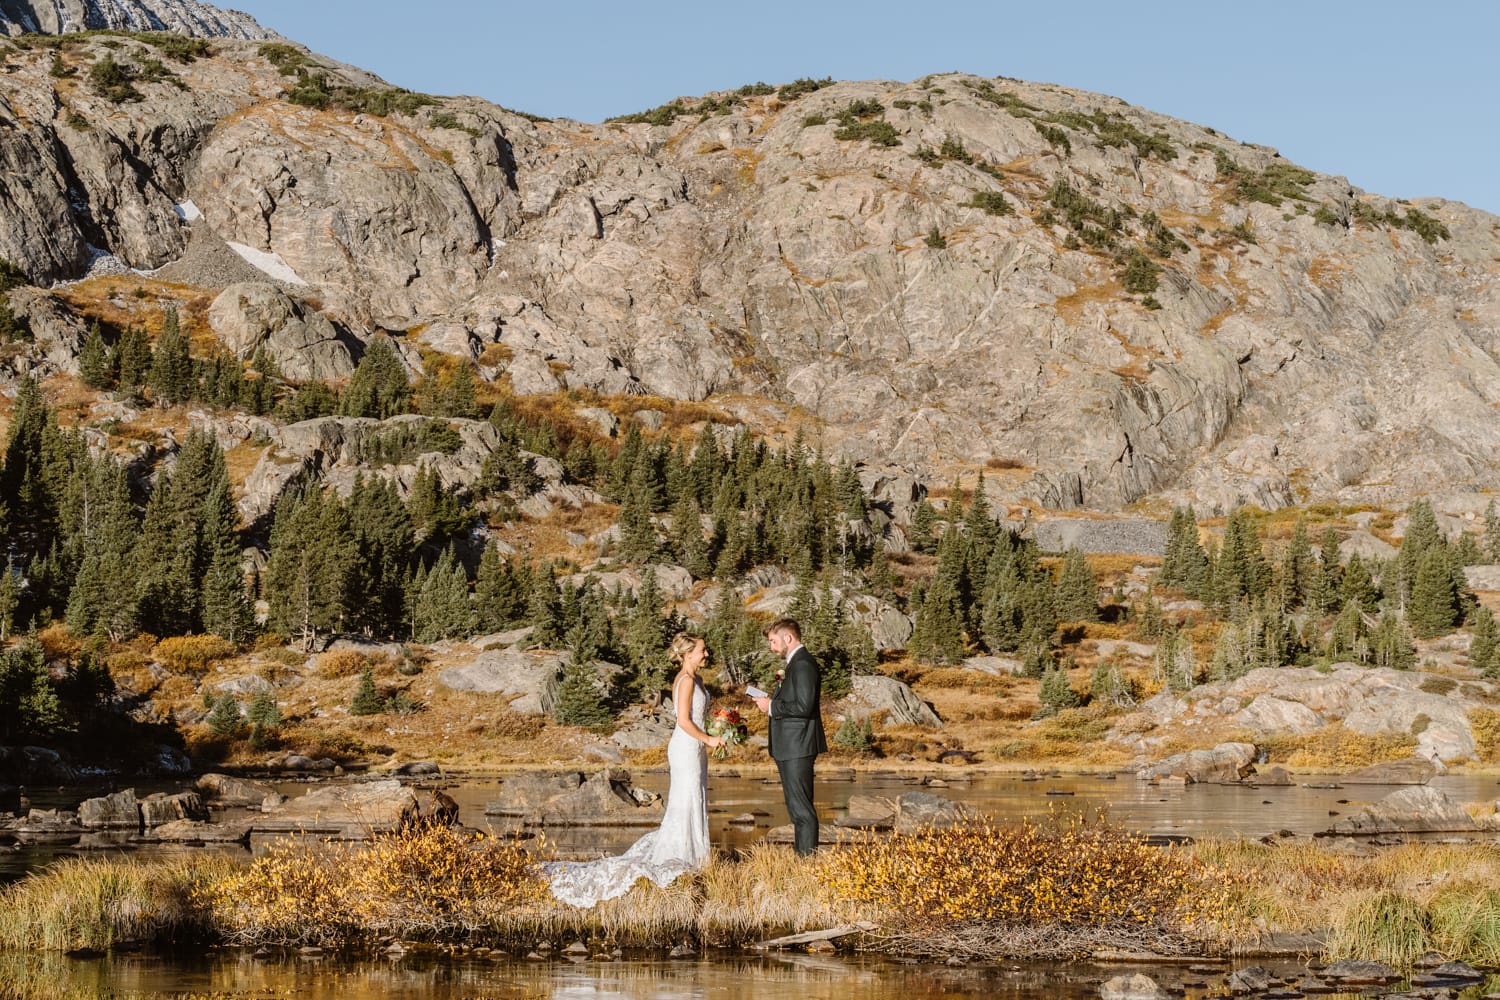 Kelsey and Eric sharing their vows at their Breckenridge elopement.